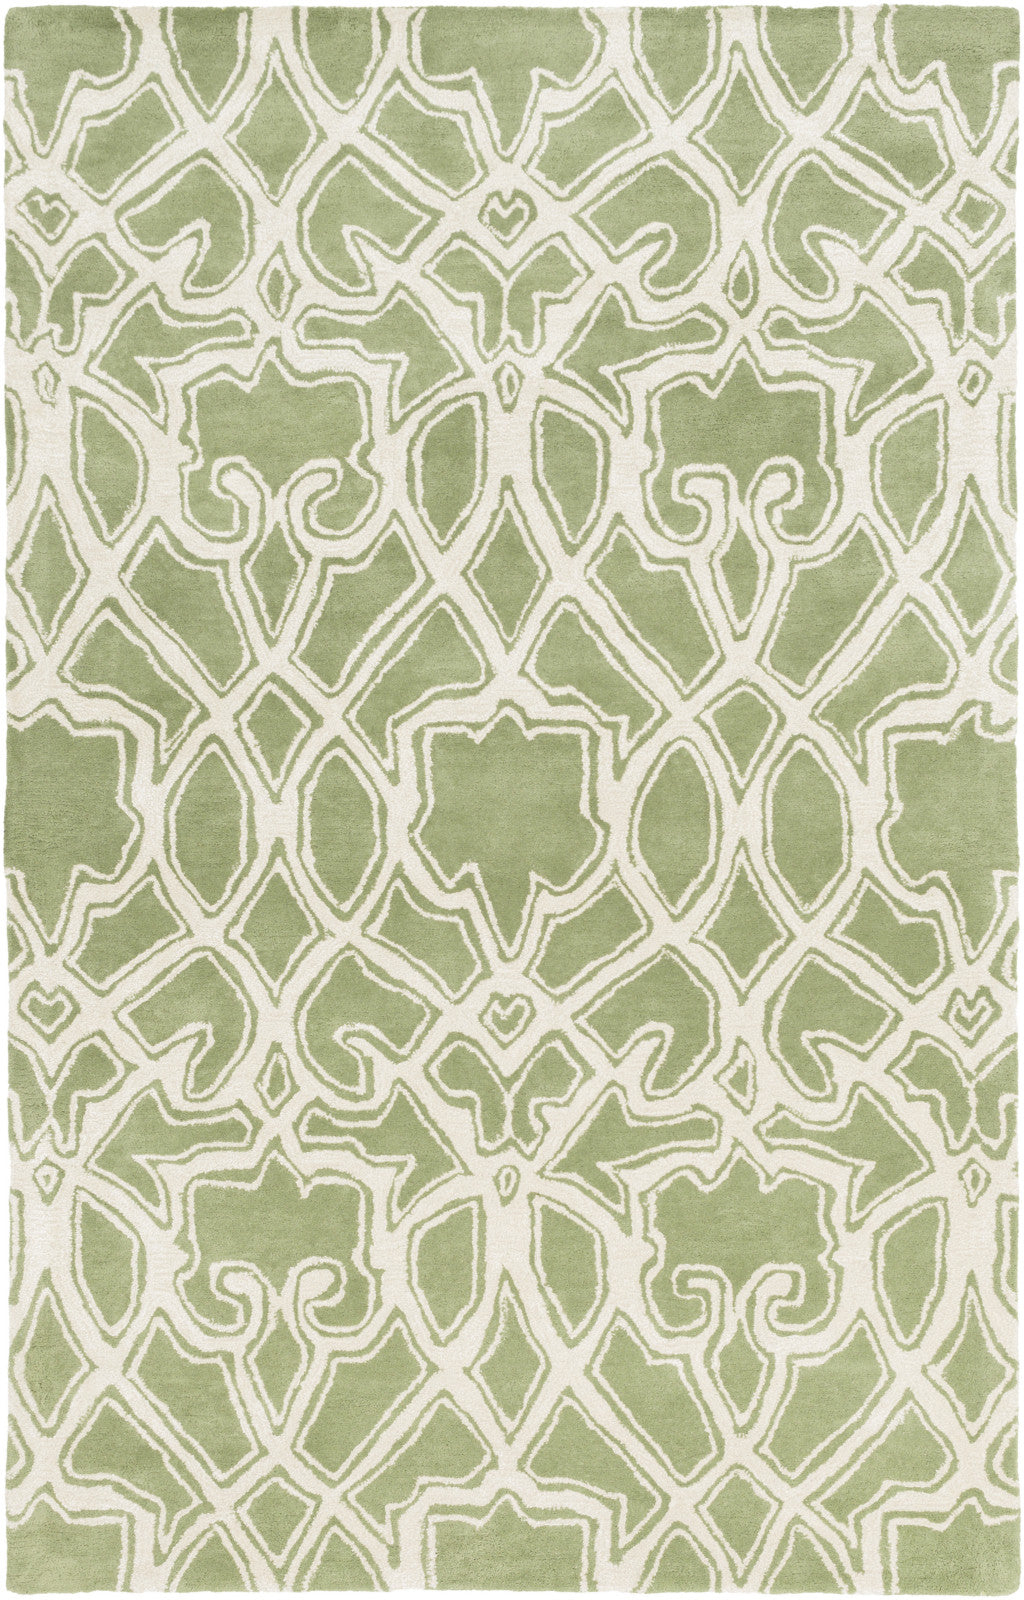 Surya Mount Perry MTP-1010 Area Rug by Florence Broadhurst